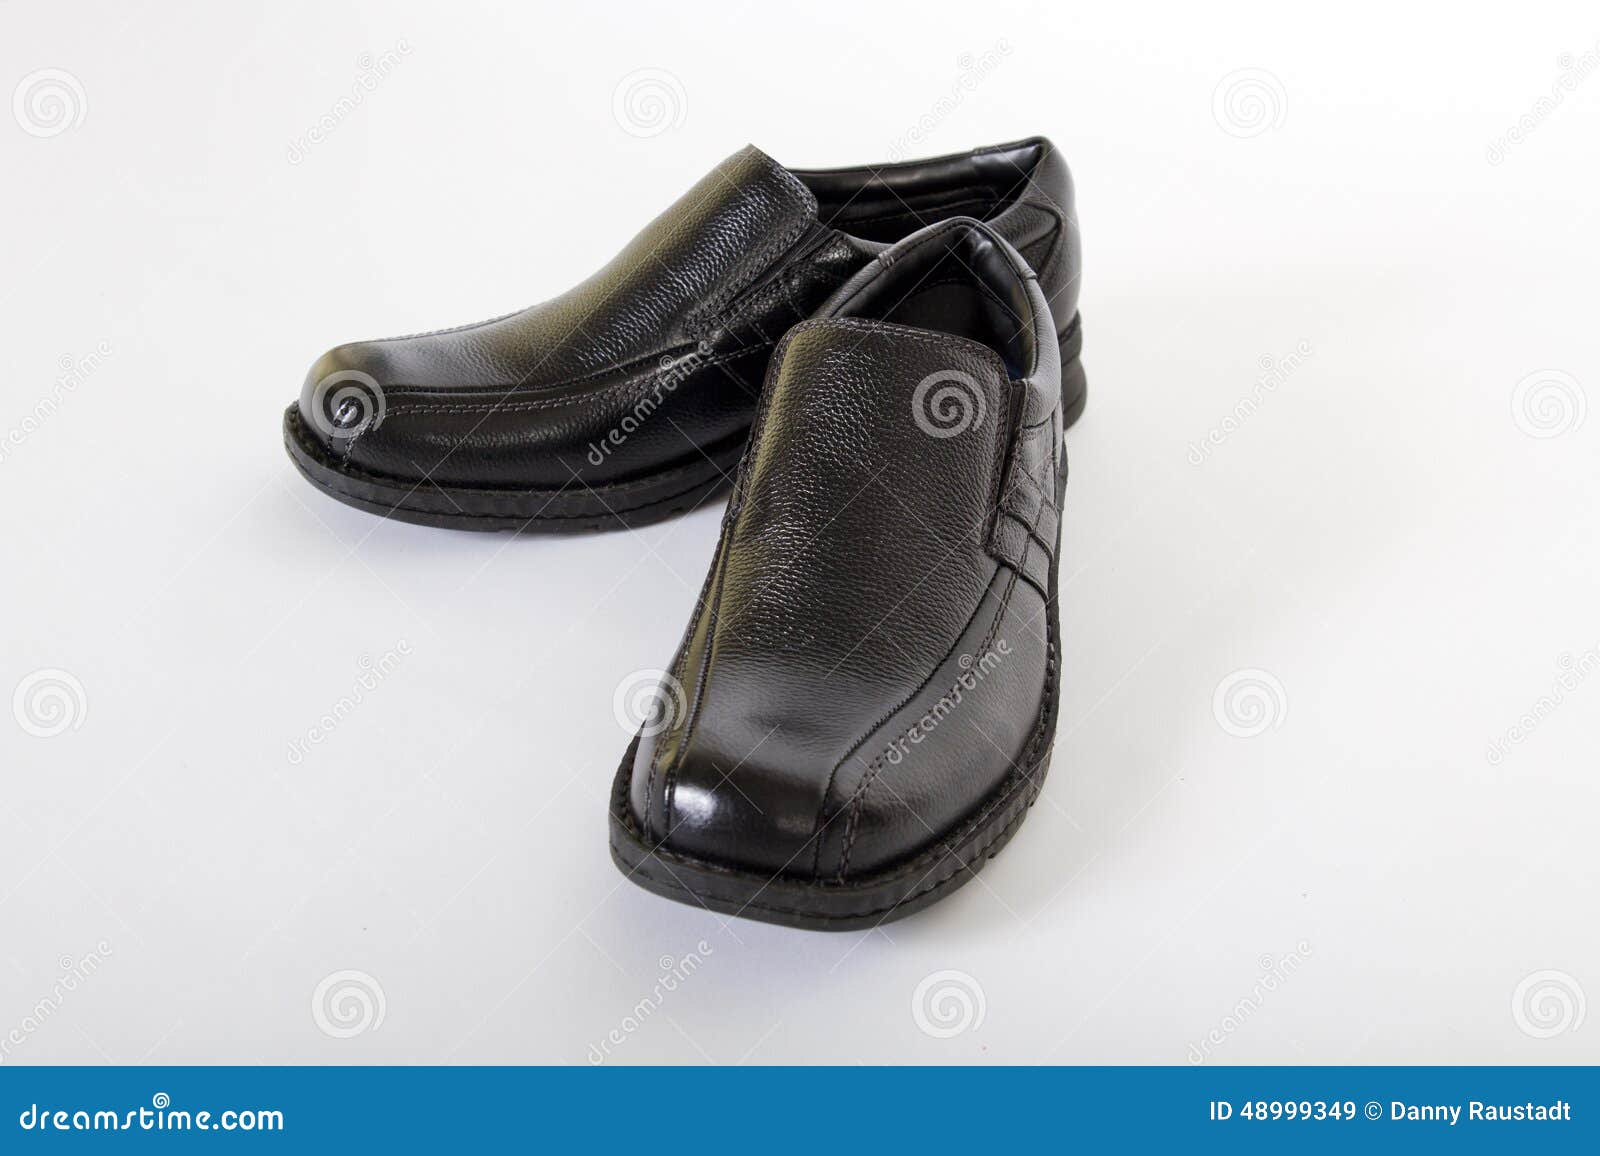 Mens Black Leather Shoes stock image. Image of leather - 48999349